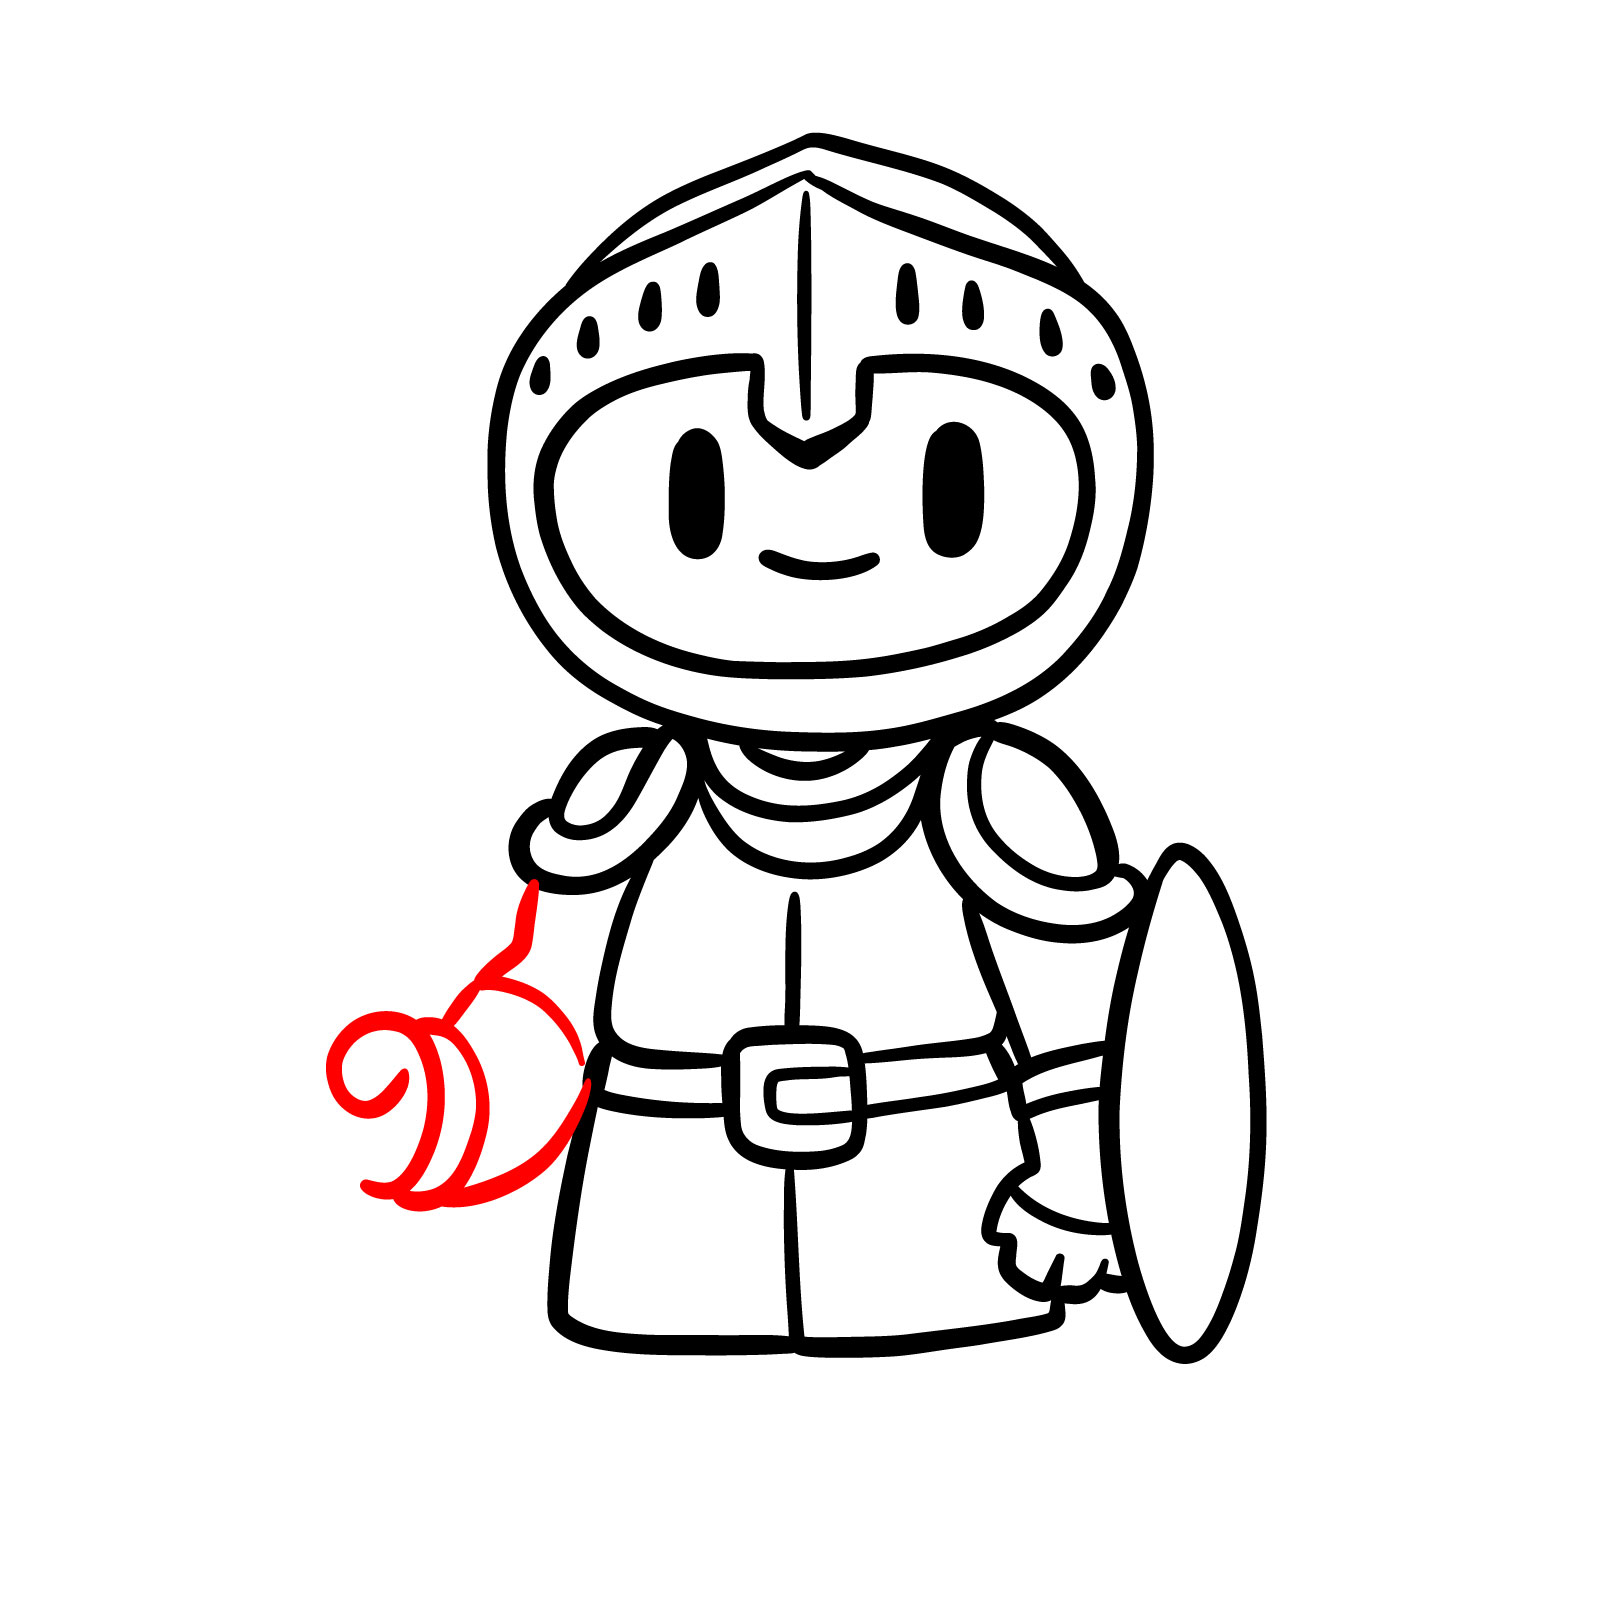 How to draw a cartoon paladin step 9: second arm and thumb sketch